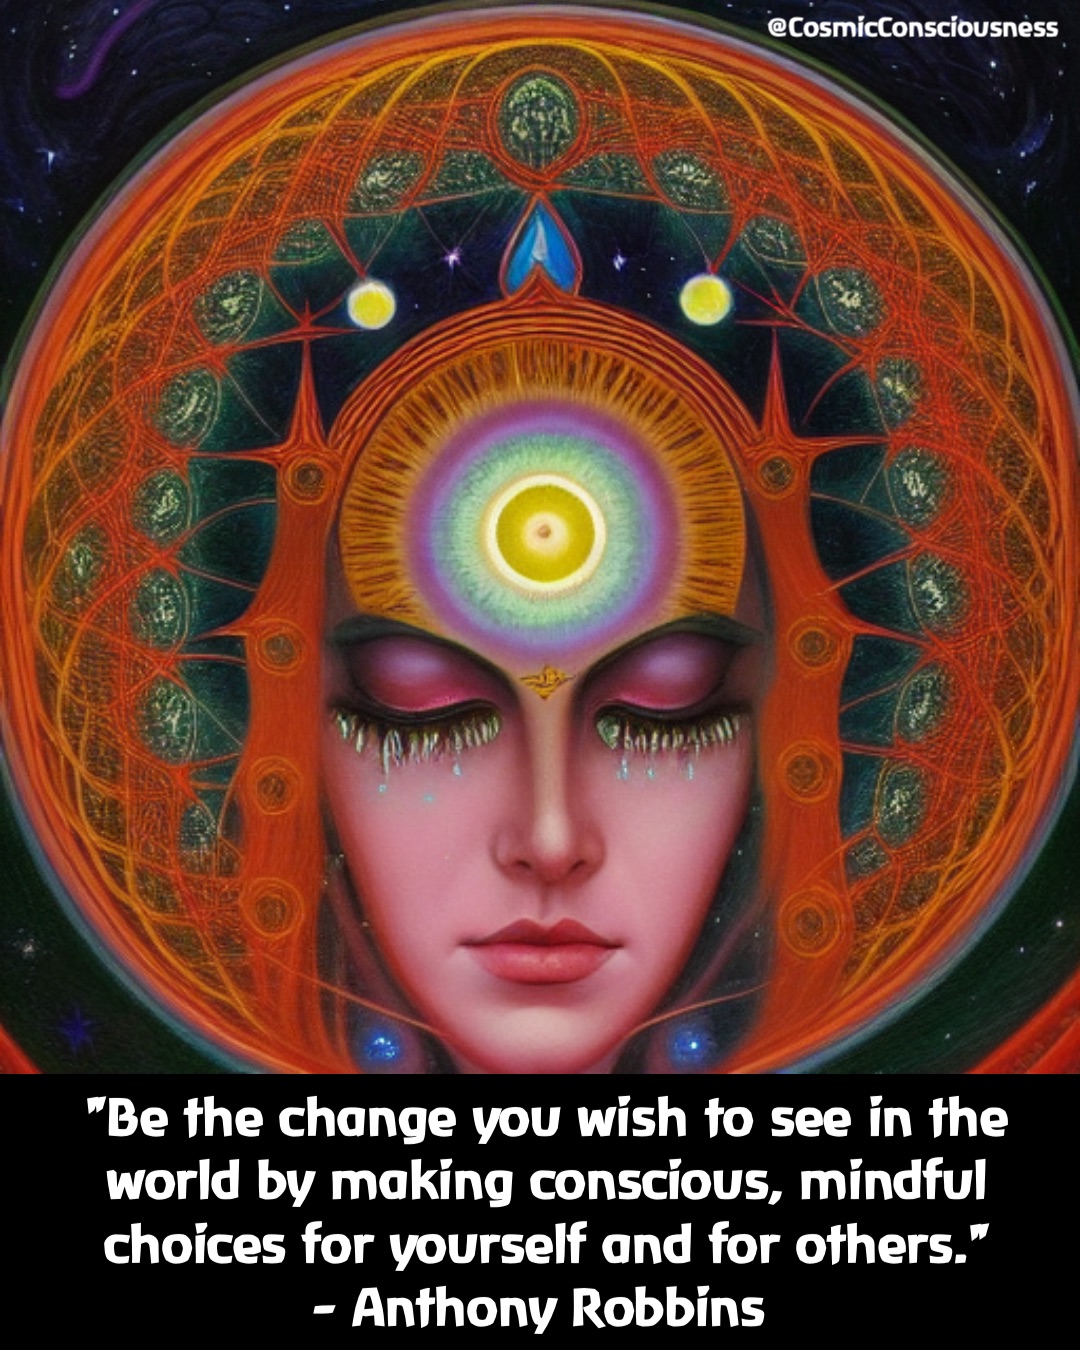 "Be the change you wish to see in the world by making conscious, mindful choices for yourself and for others." 
- Anthony Robbins @CosmicConsciousness